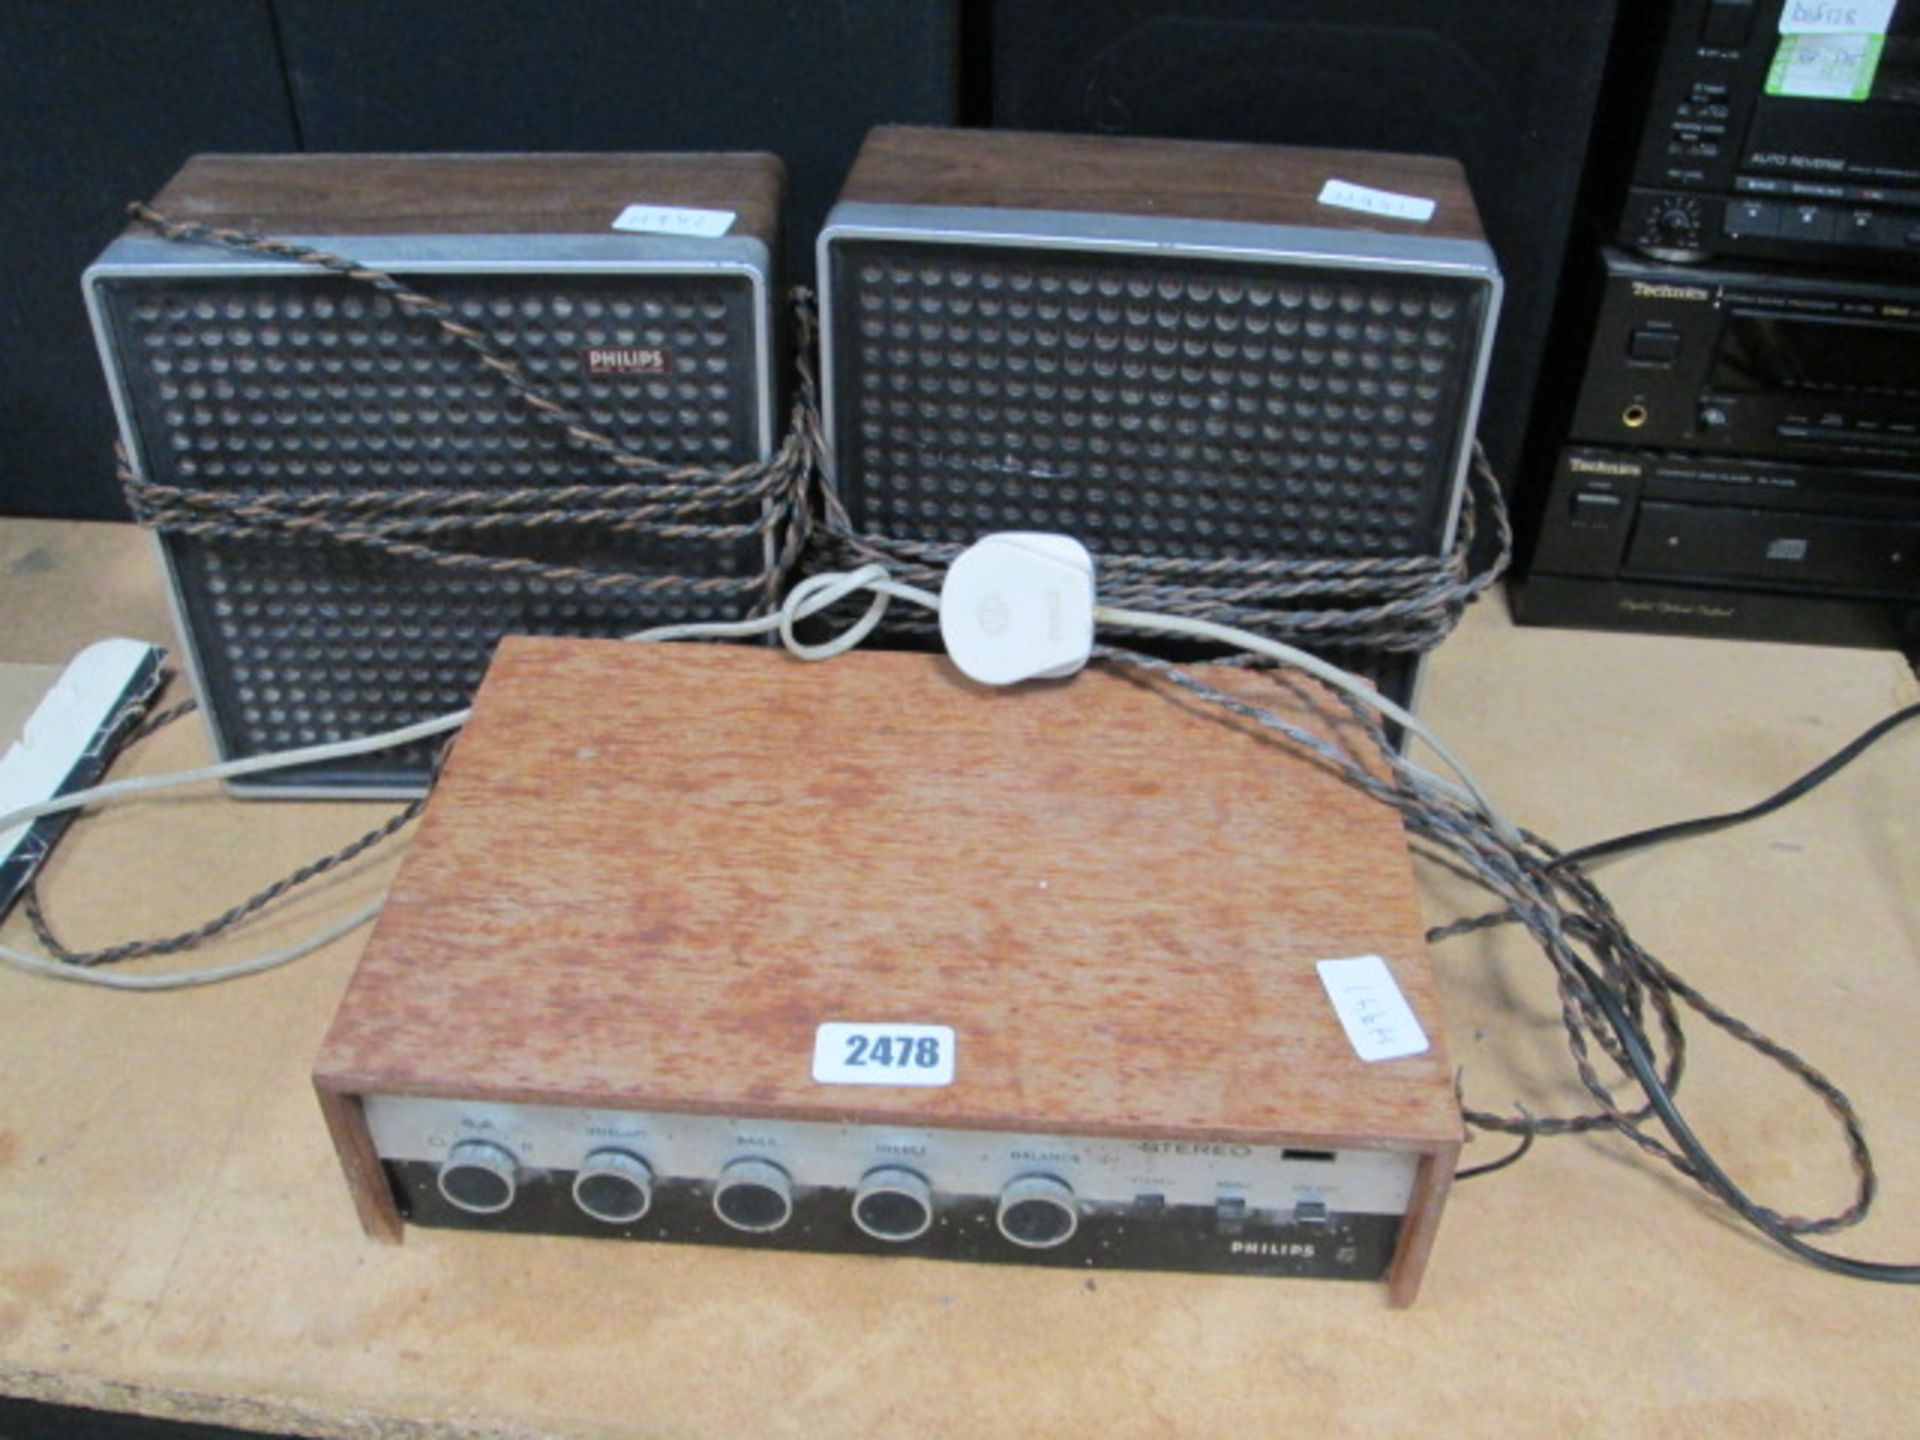 Philips stereo receiver unit with speakers